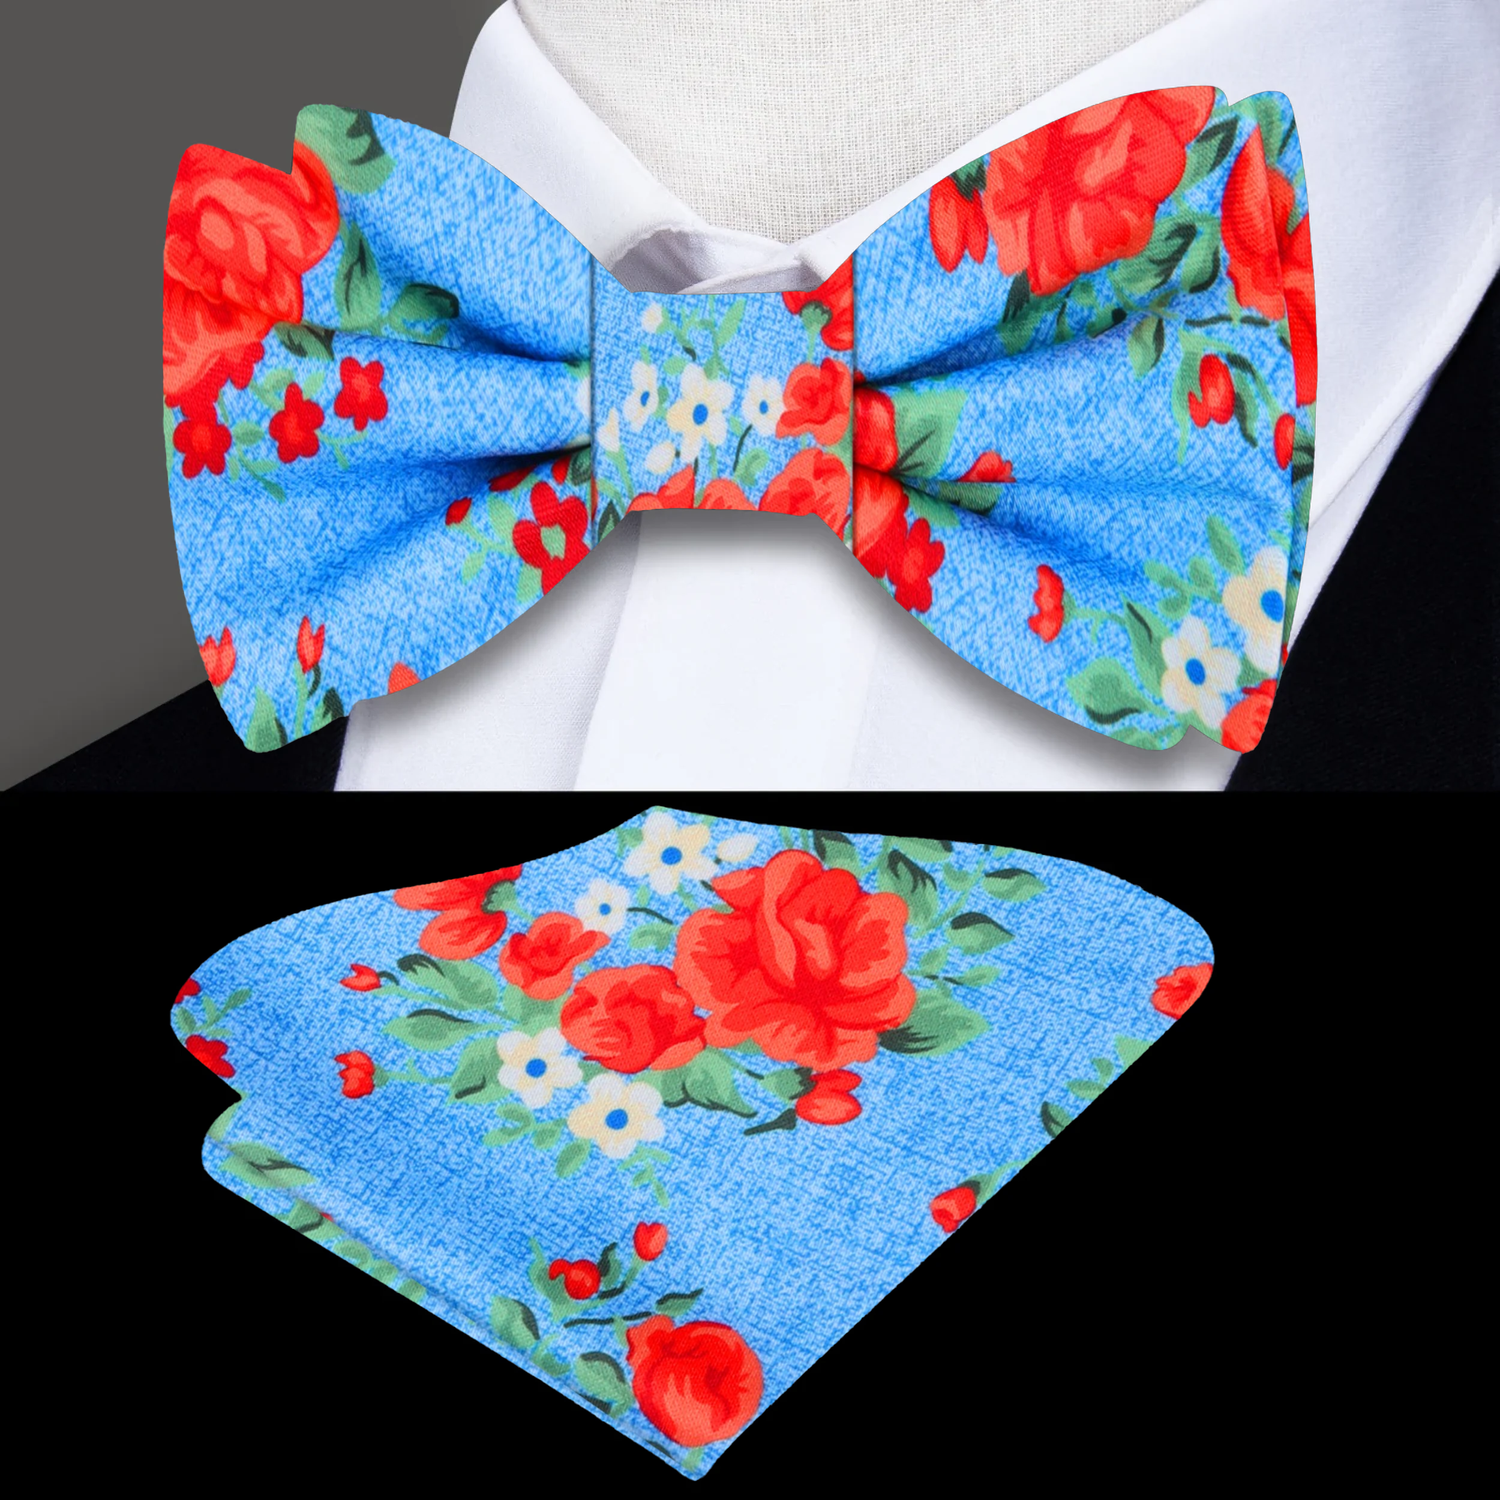 Light Blue, Red, Green Rose Bunches Bow Tie and Pocket Square||Light Blue